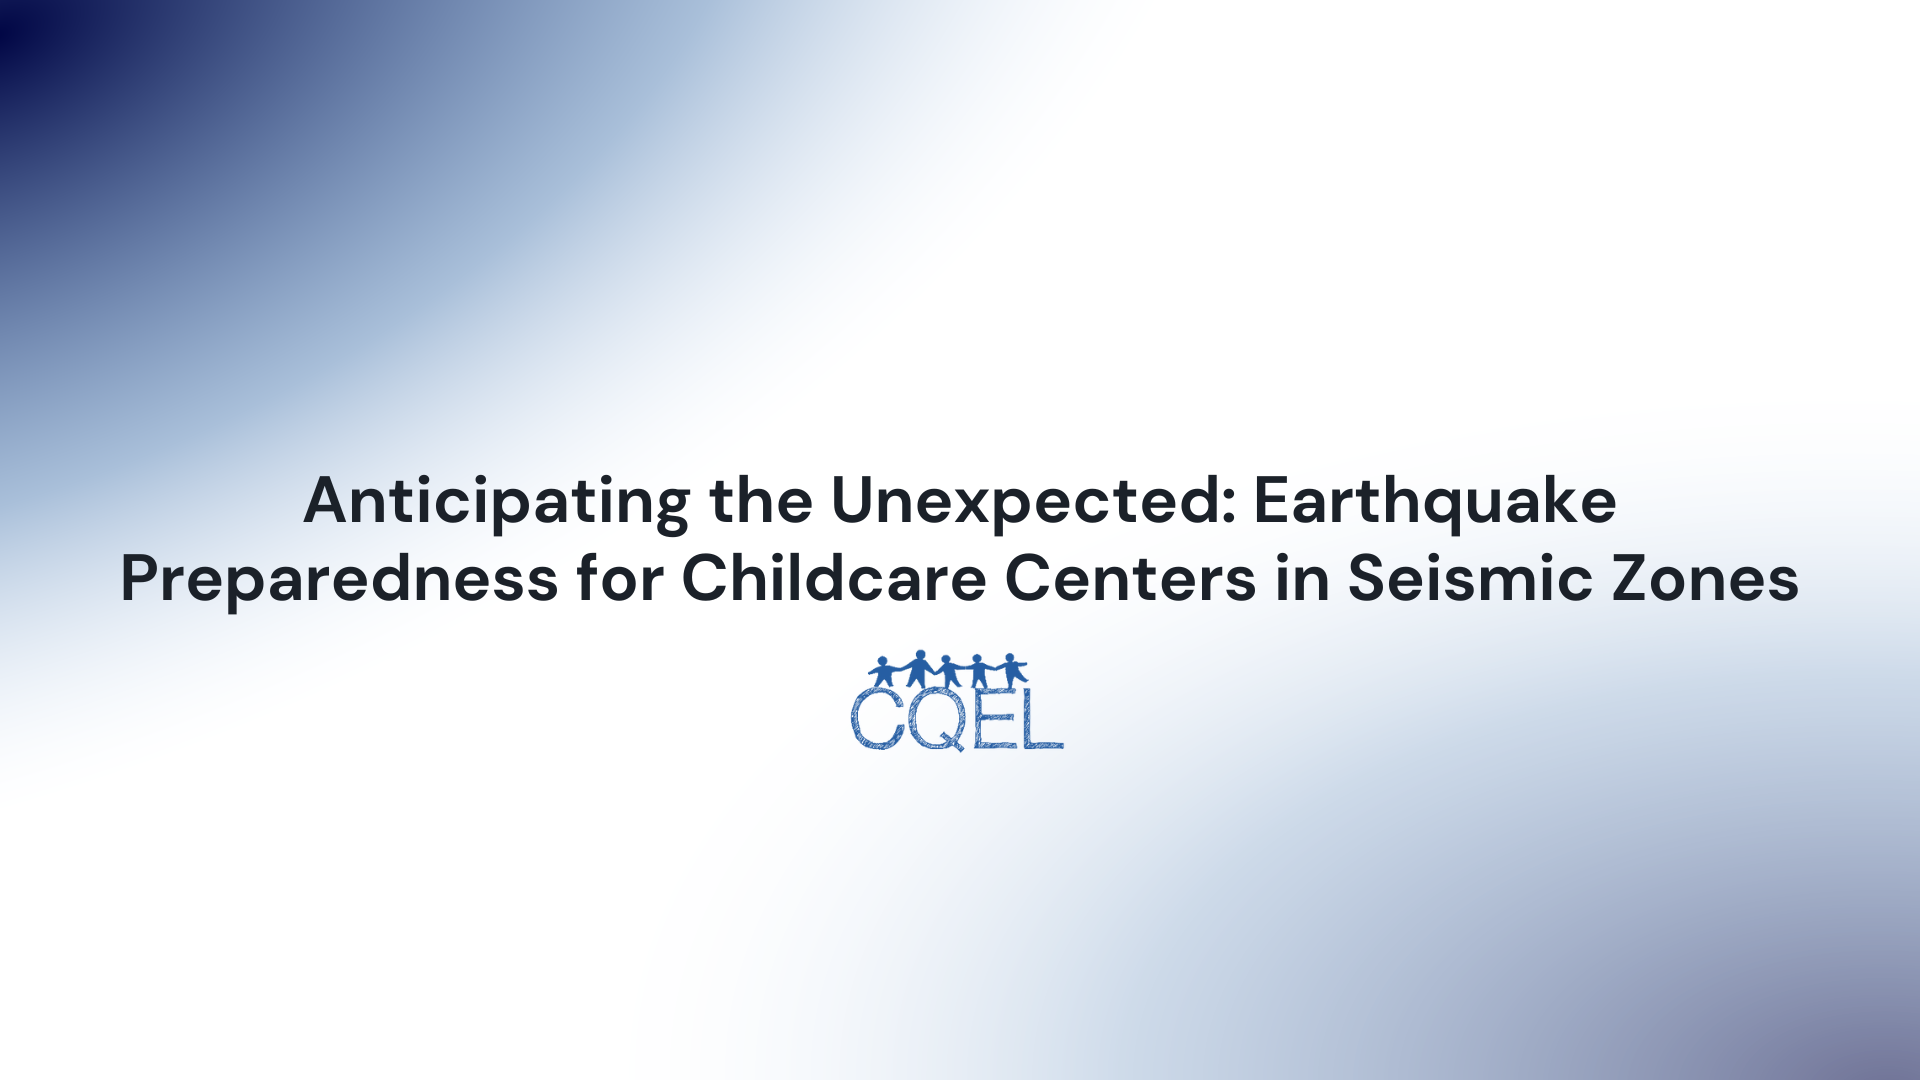 Anticipating the Unexpected: Earthquake Preparedness for Childcare Centers in Seismic Zones